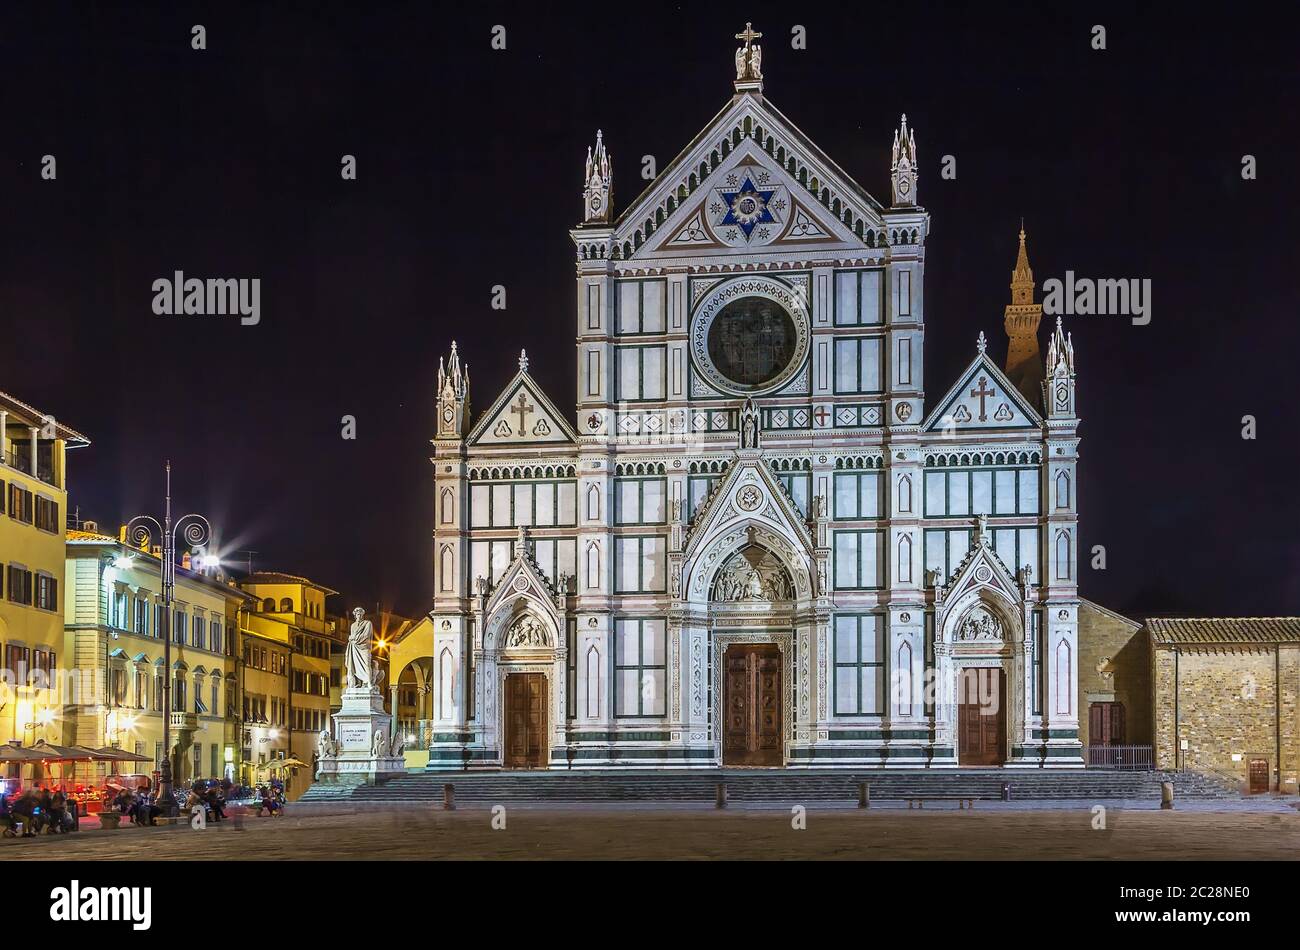 Basilica of Santa Croce in evening, Florence, Italy Stock Photo